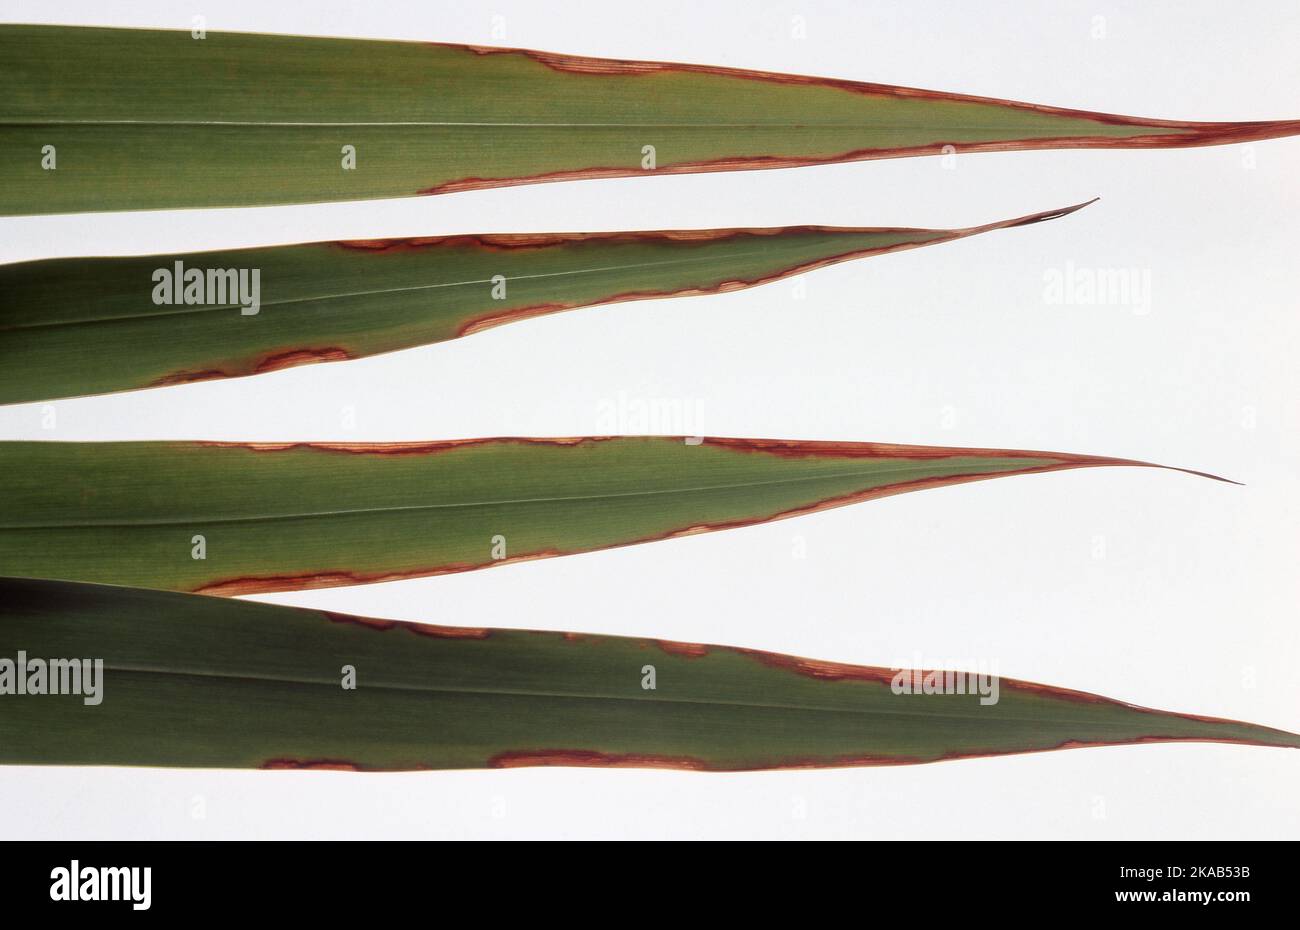 LEAVES OF WATSONIA (BUGLE LILY) PLANT DAMAGED BY EXCESS NUTRIENTS. Stock Photo